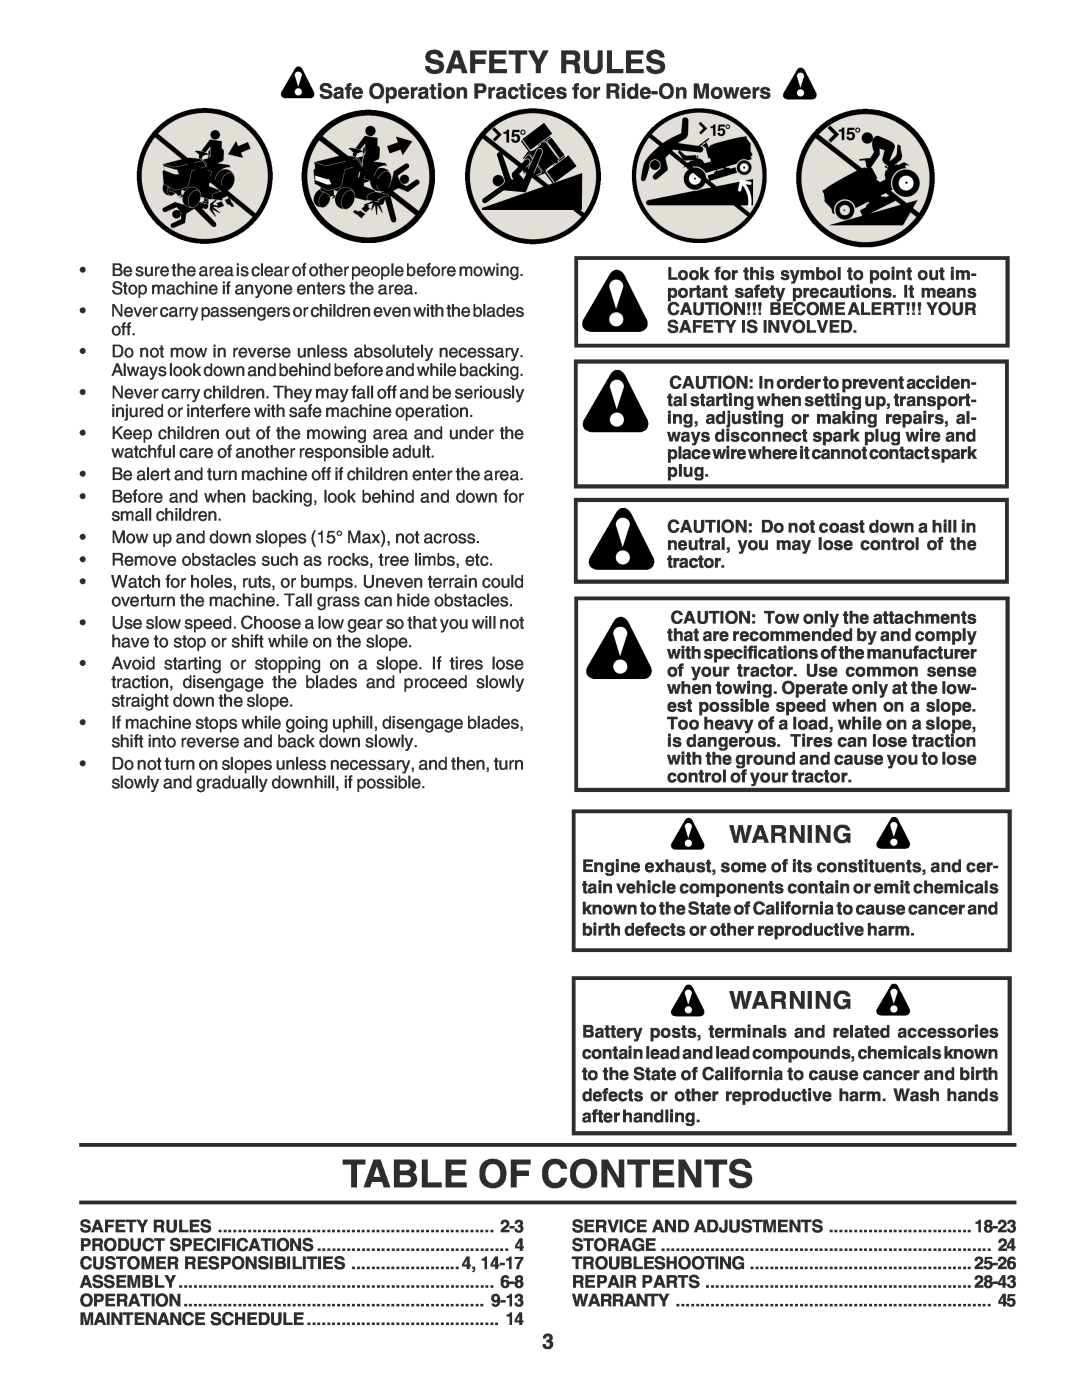 Poulan 180196 Table Of Contents, Safety Rules, Safe Operation Practices for Ride-On Mowers, 9-13, 18-23, 25-26, 28-43 